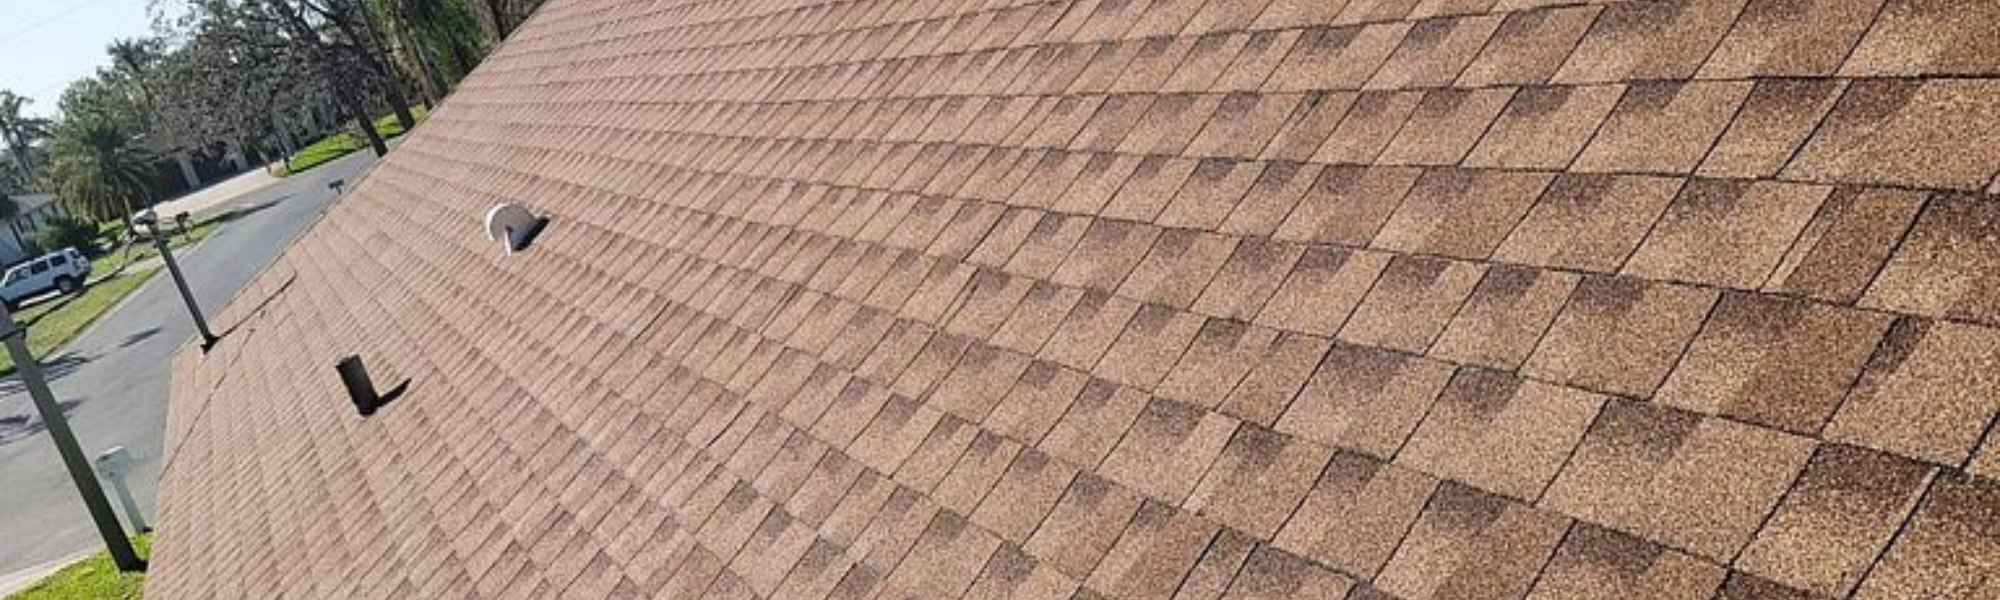 A Roofing Company in Panama City | GAF Workmanship Coverage | Roofing Companies in Panama City | Best Panama City Roofing Company | Residential and Commercial Roofer in Panama City | Trusted | Quote | Estimate | Replace